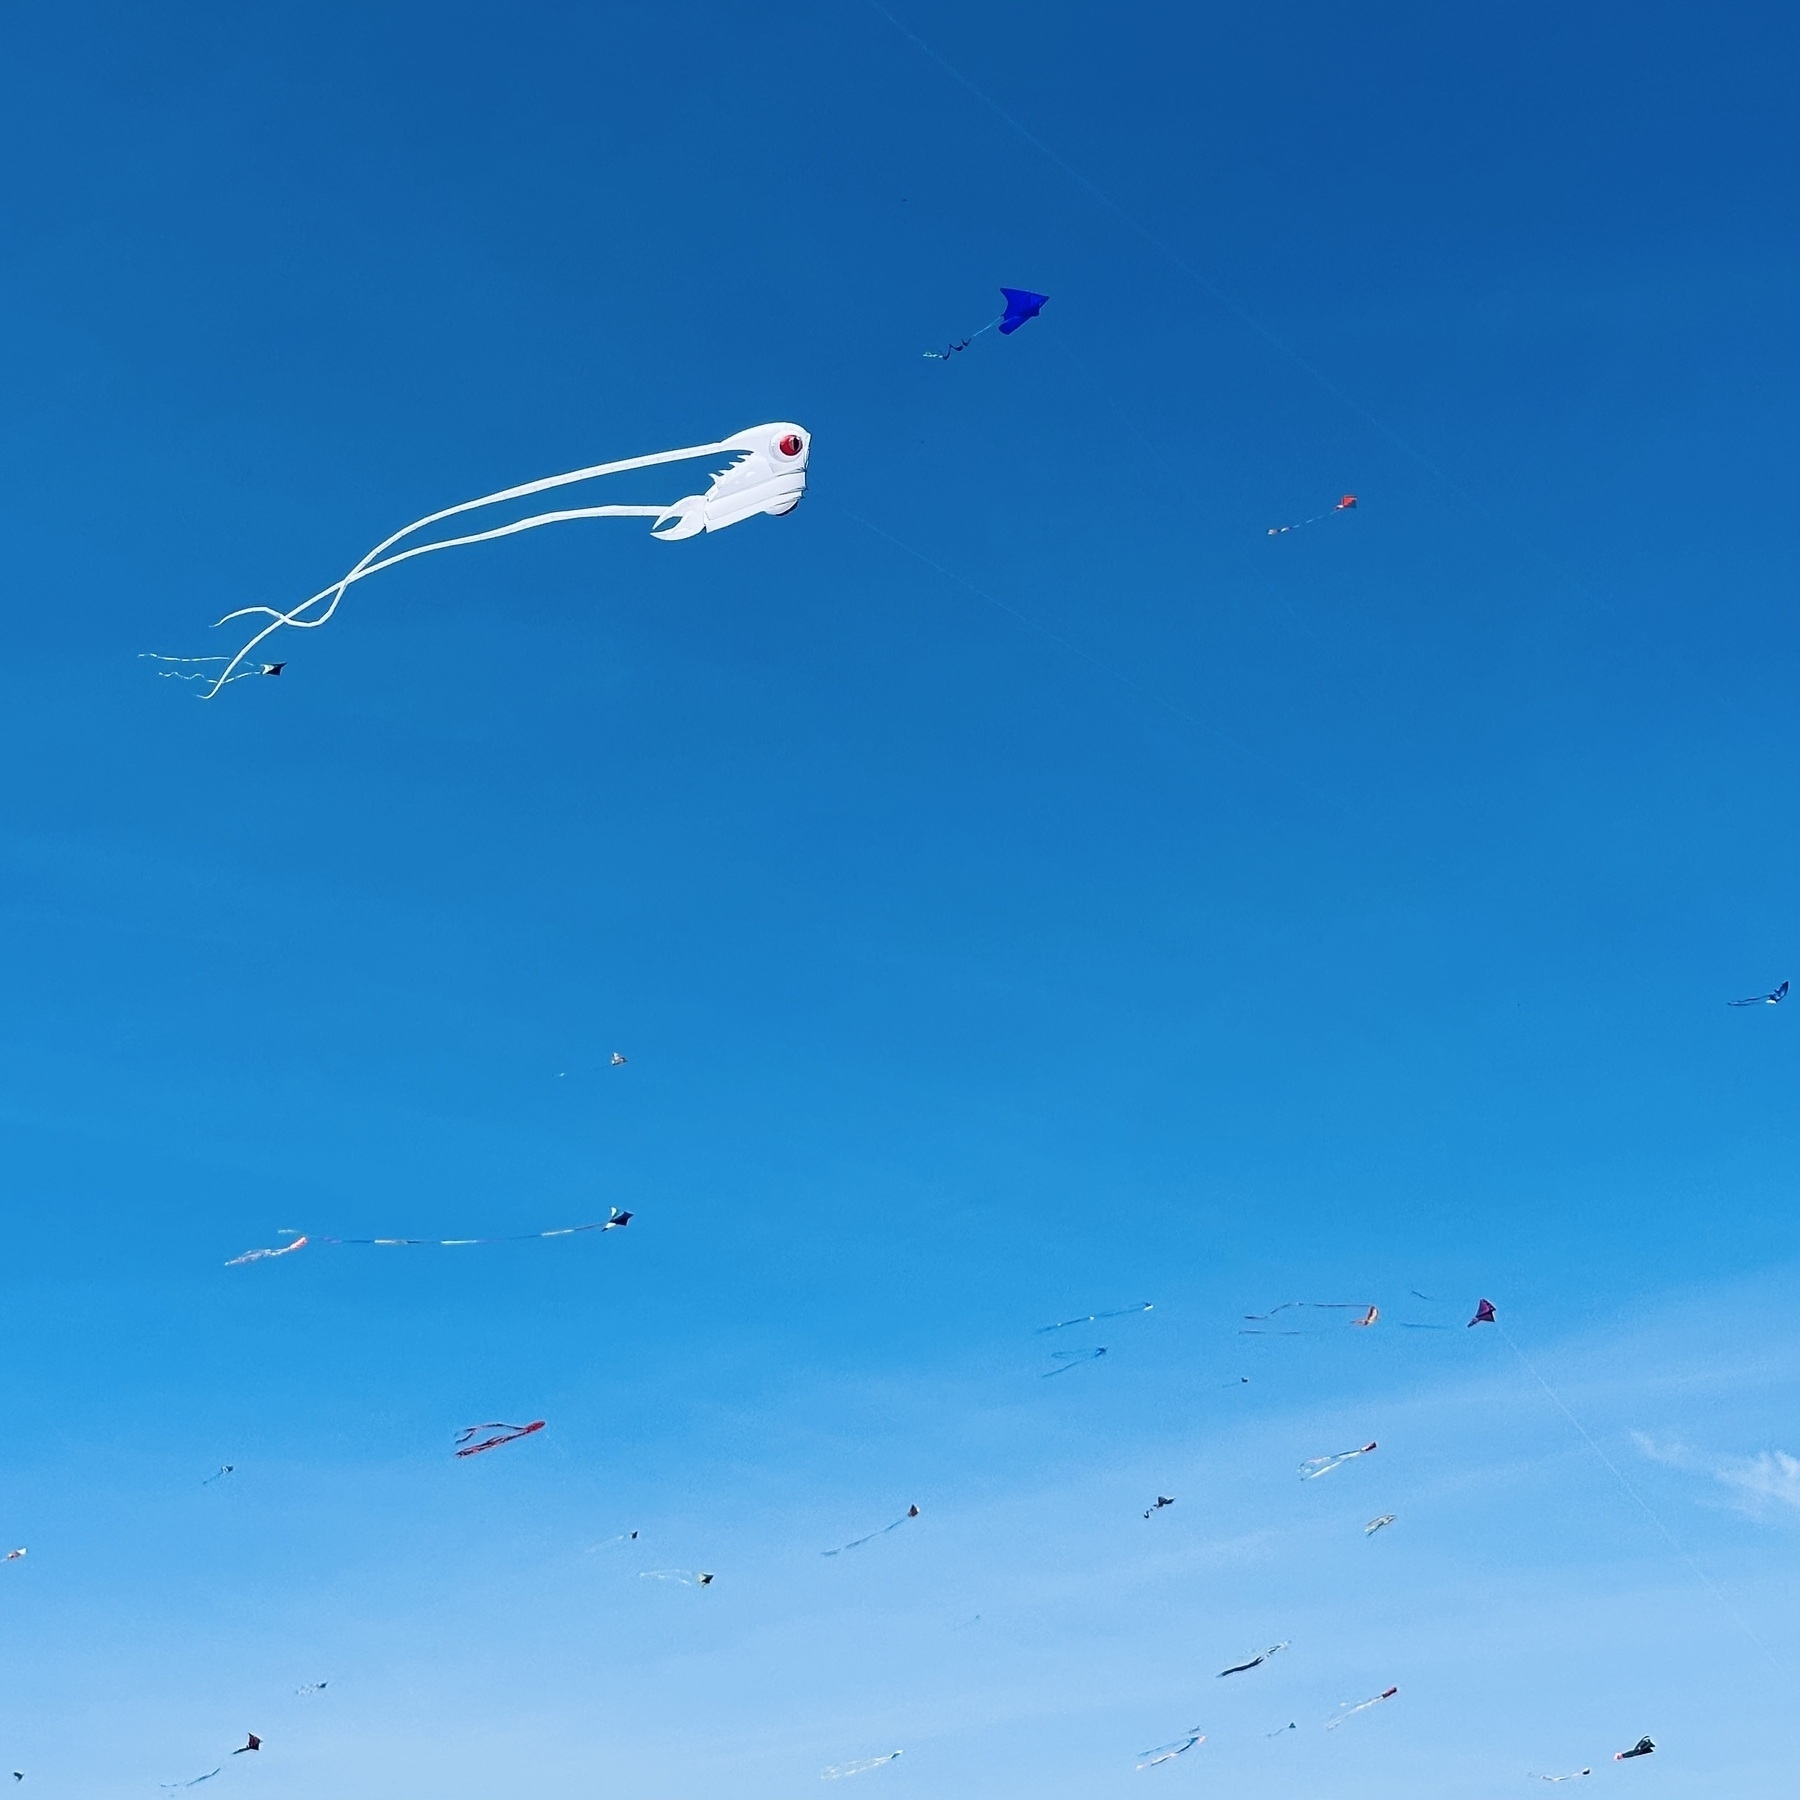 Blue sky with kites flying.